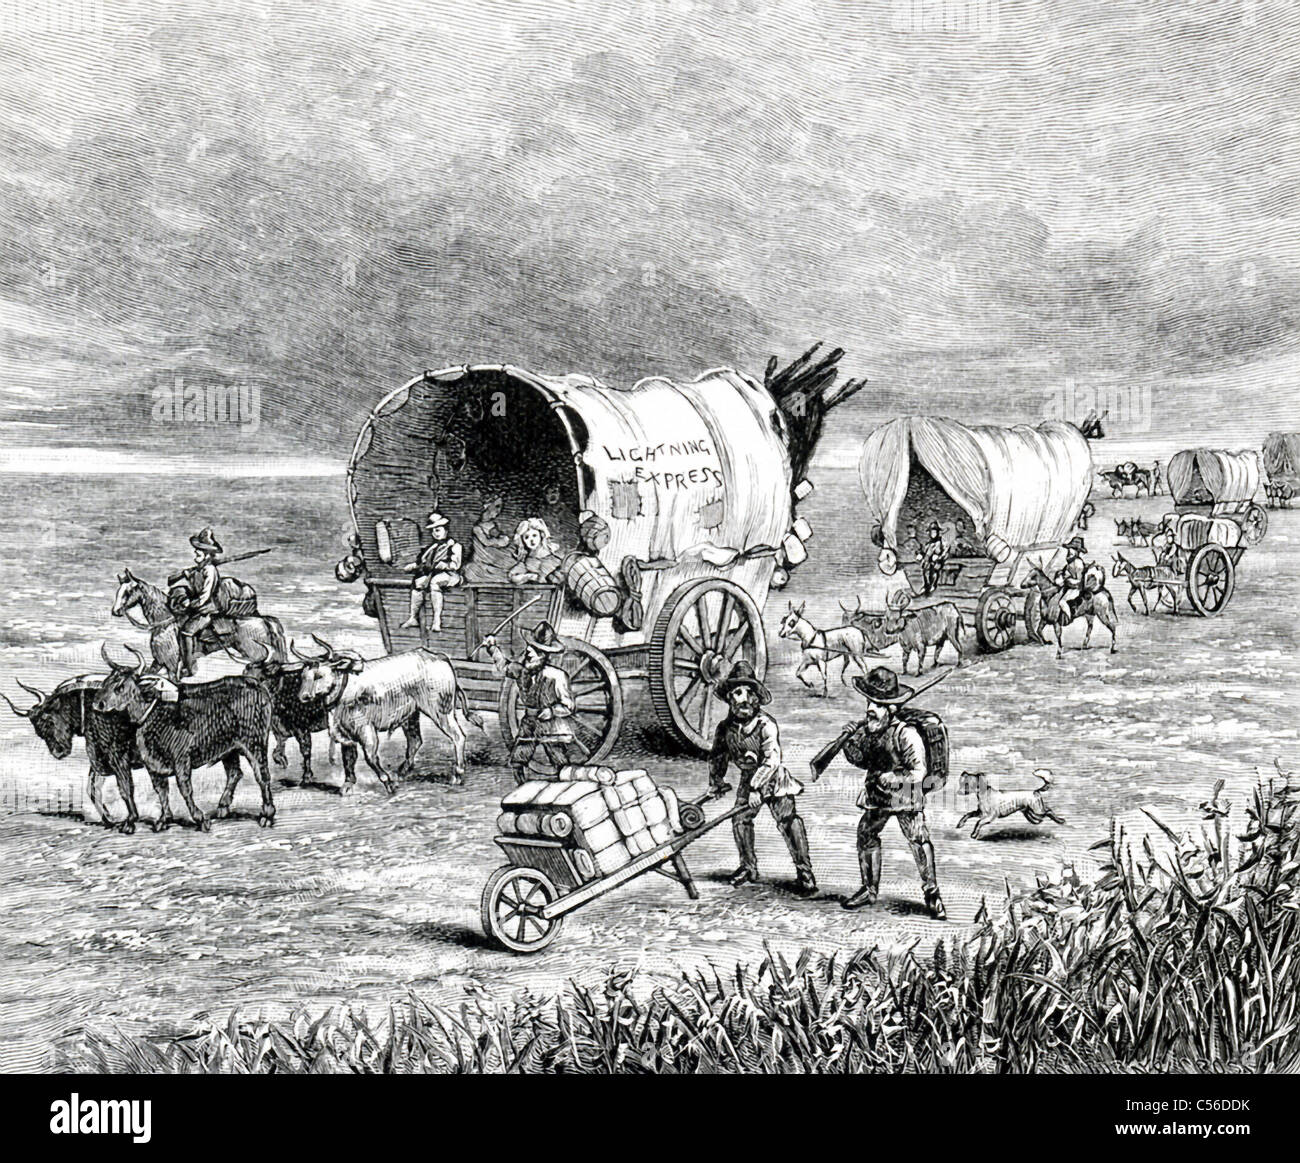 On a covered wagon drawn by two yoke of oxen and crossing the Plains in1859 appeared in large letters 'Lightning Express.' Stock Photo